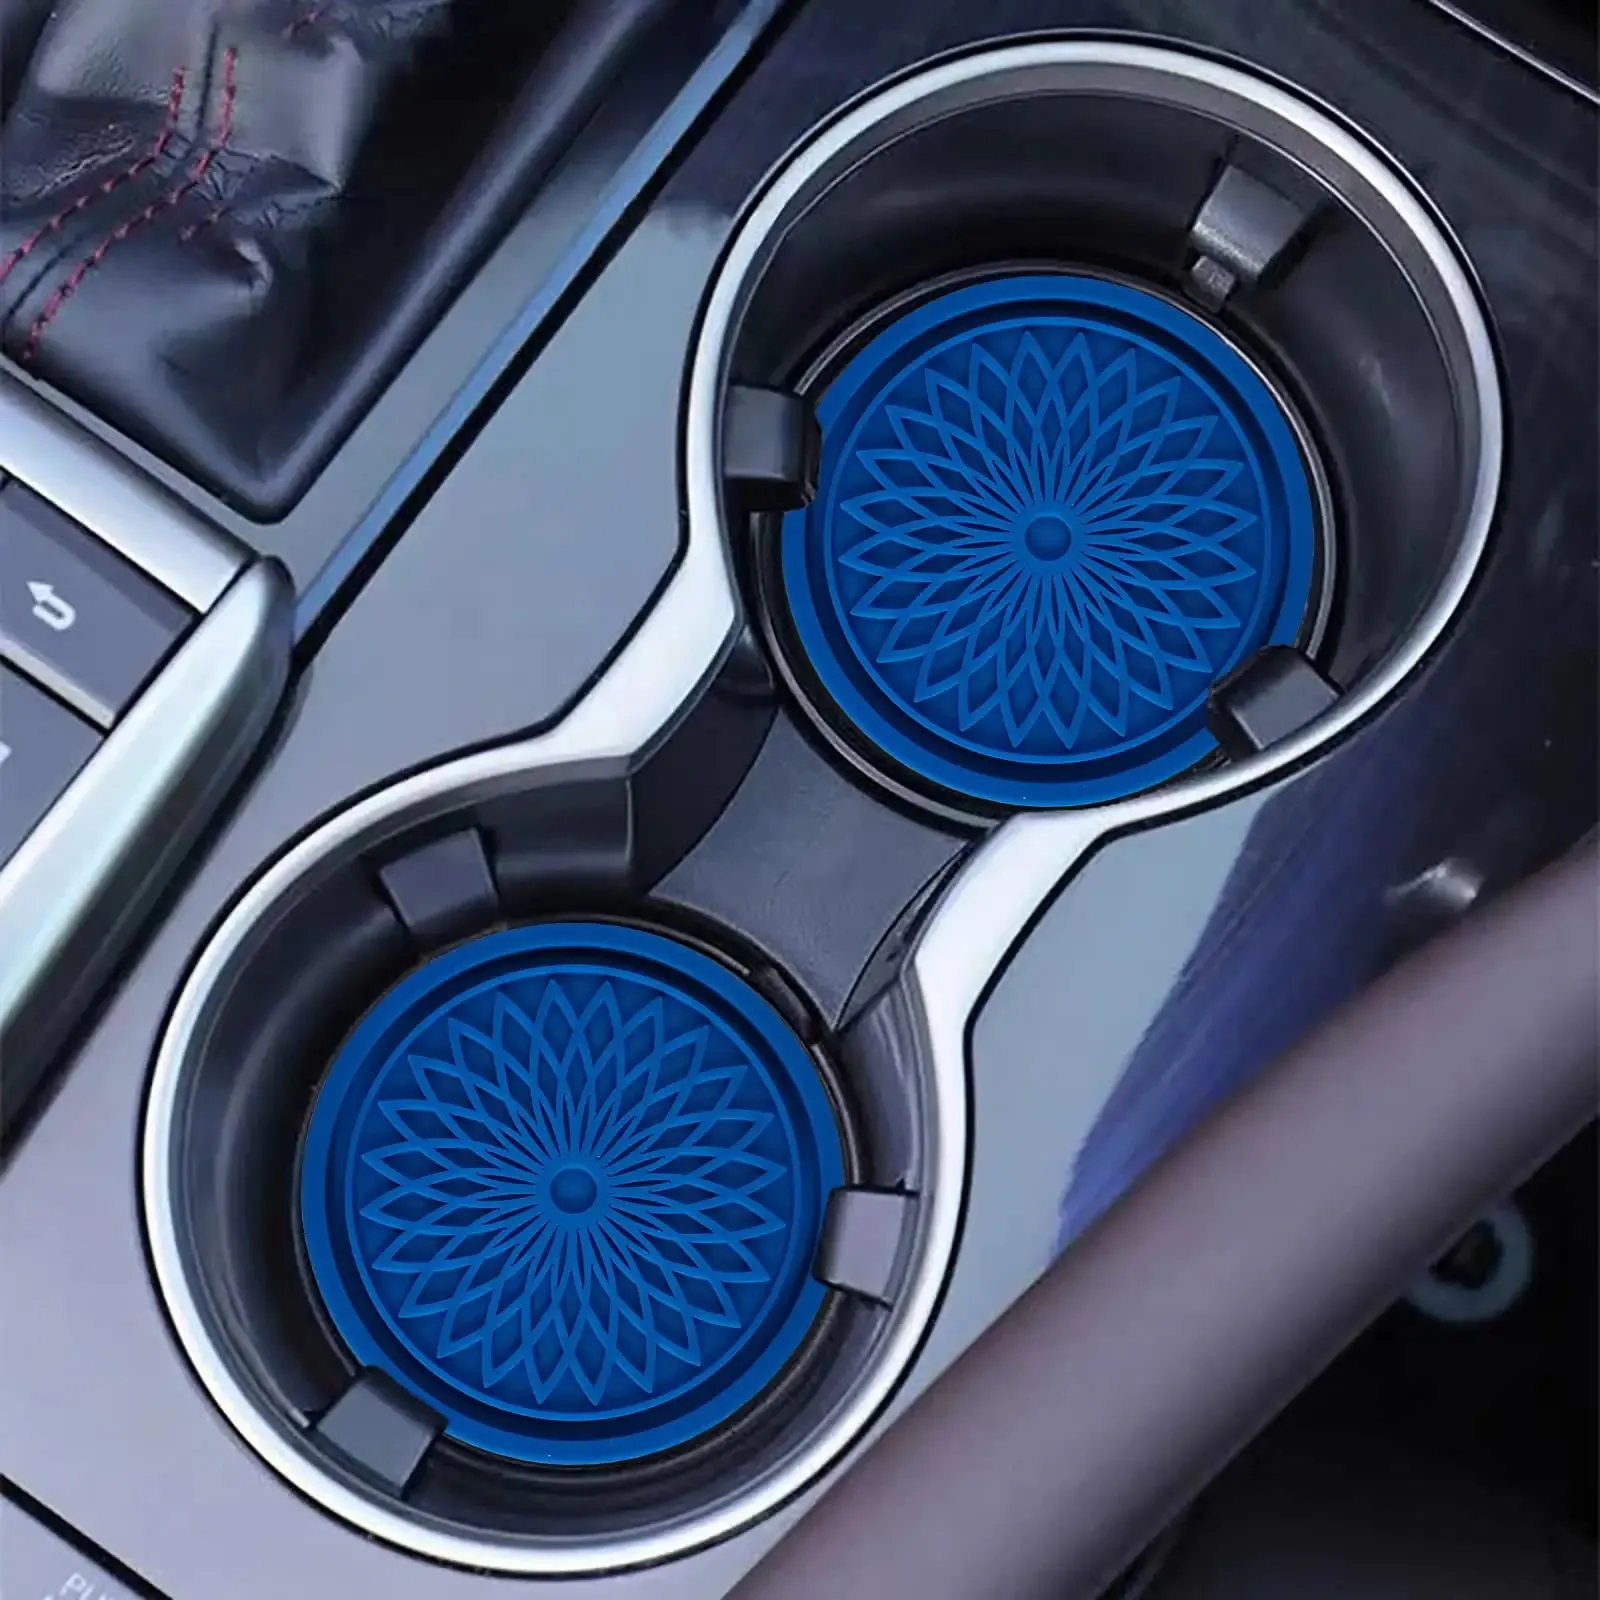 High quality and best-selling anti slip embedded car interior accessories, car cup holders, PVC and silicone coasters